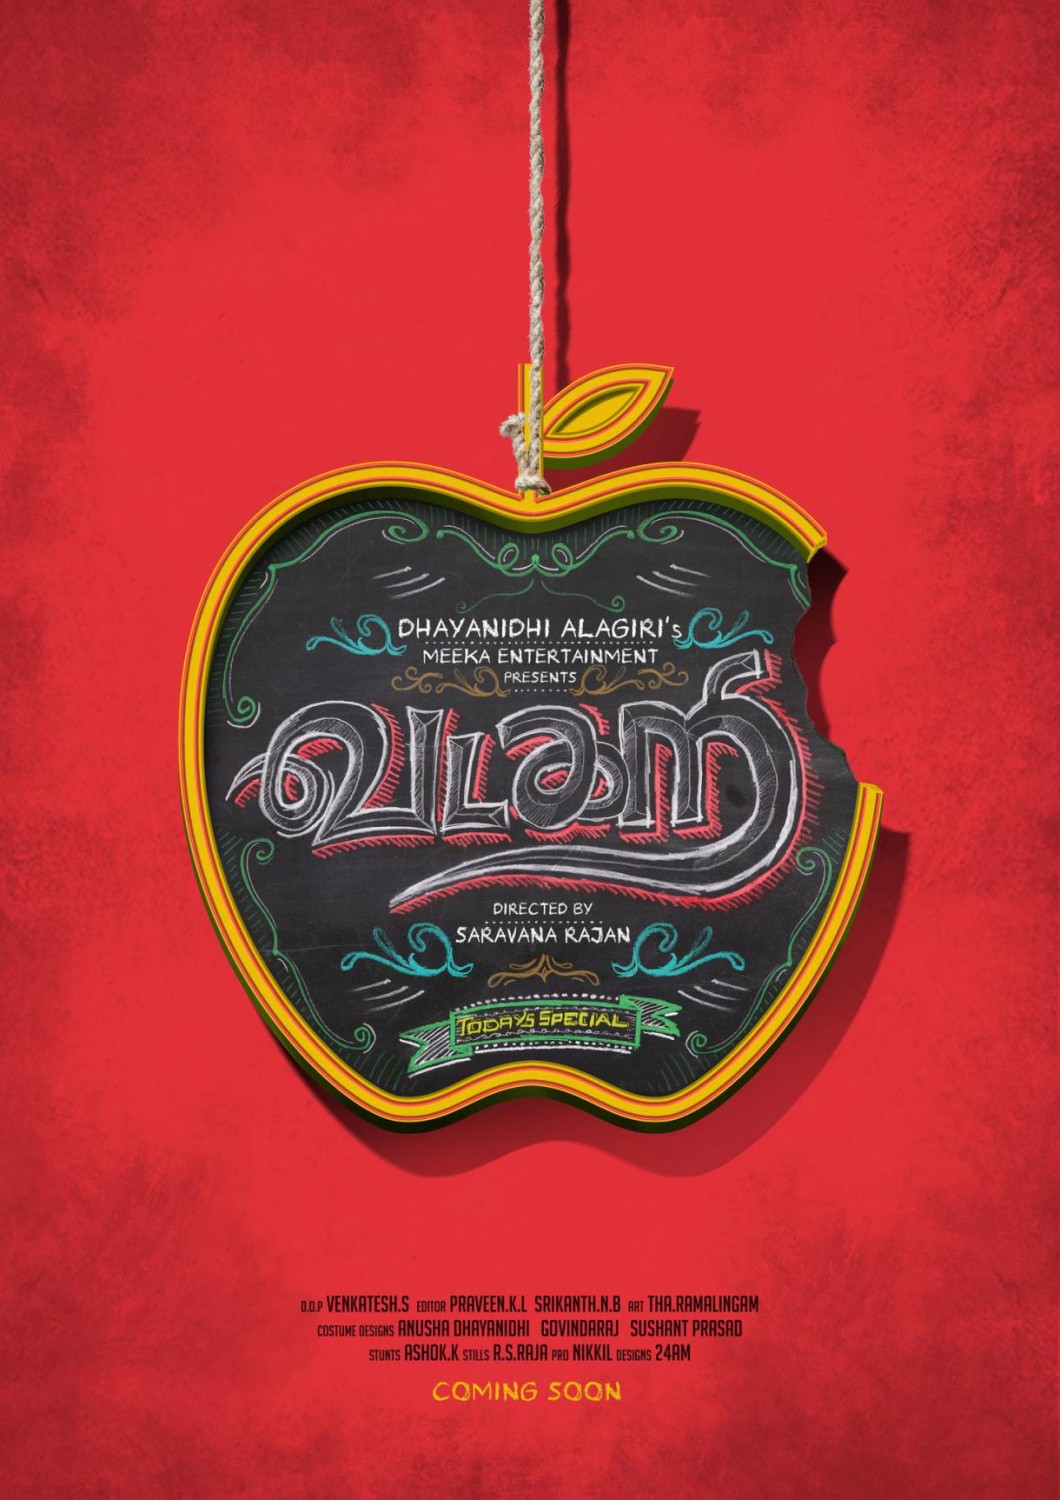 Extra Large Movie Poster Image for Vadacurry 